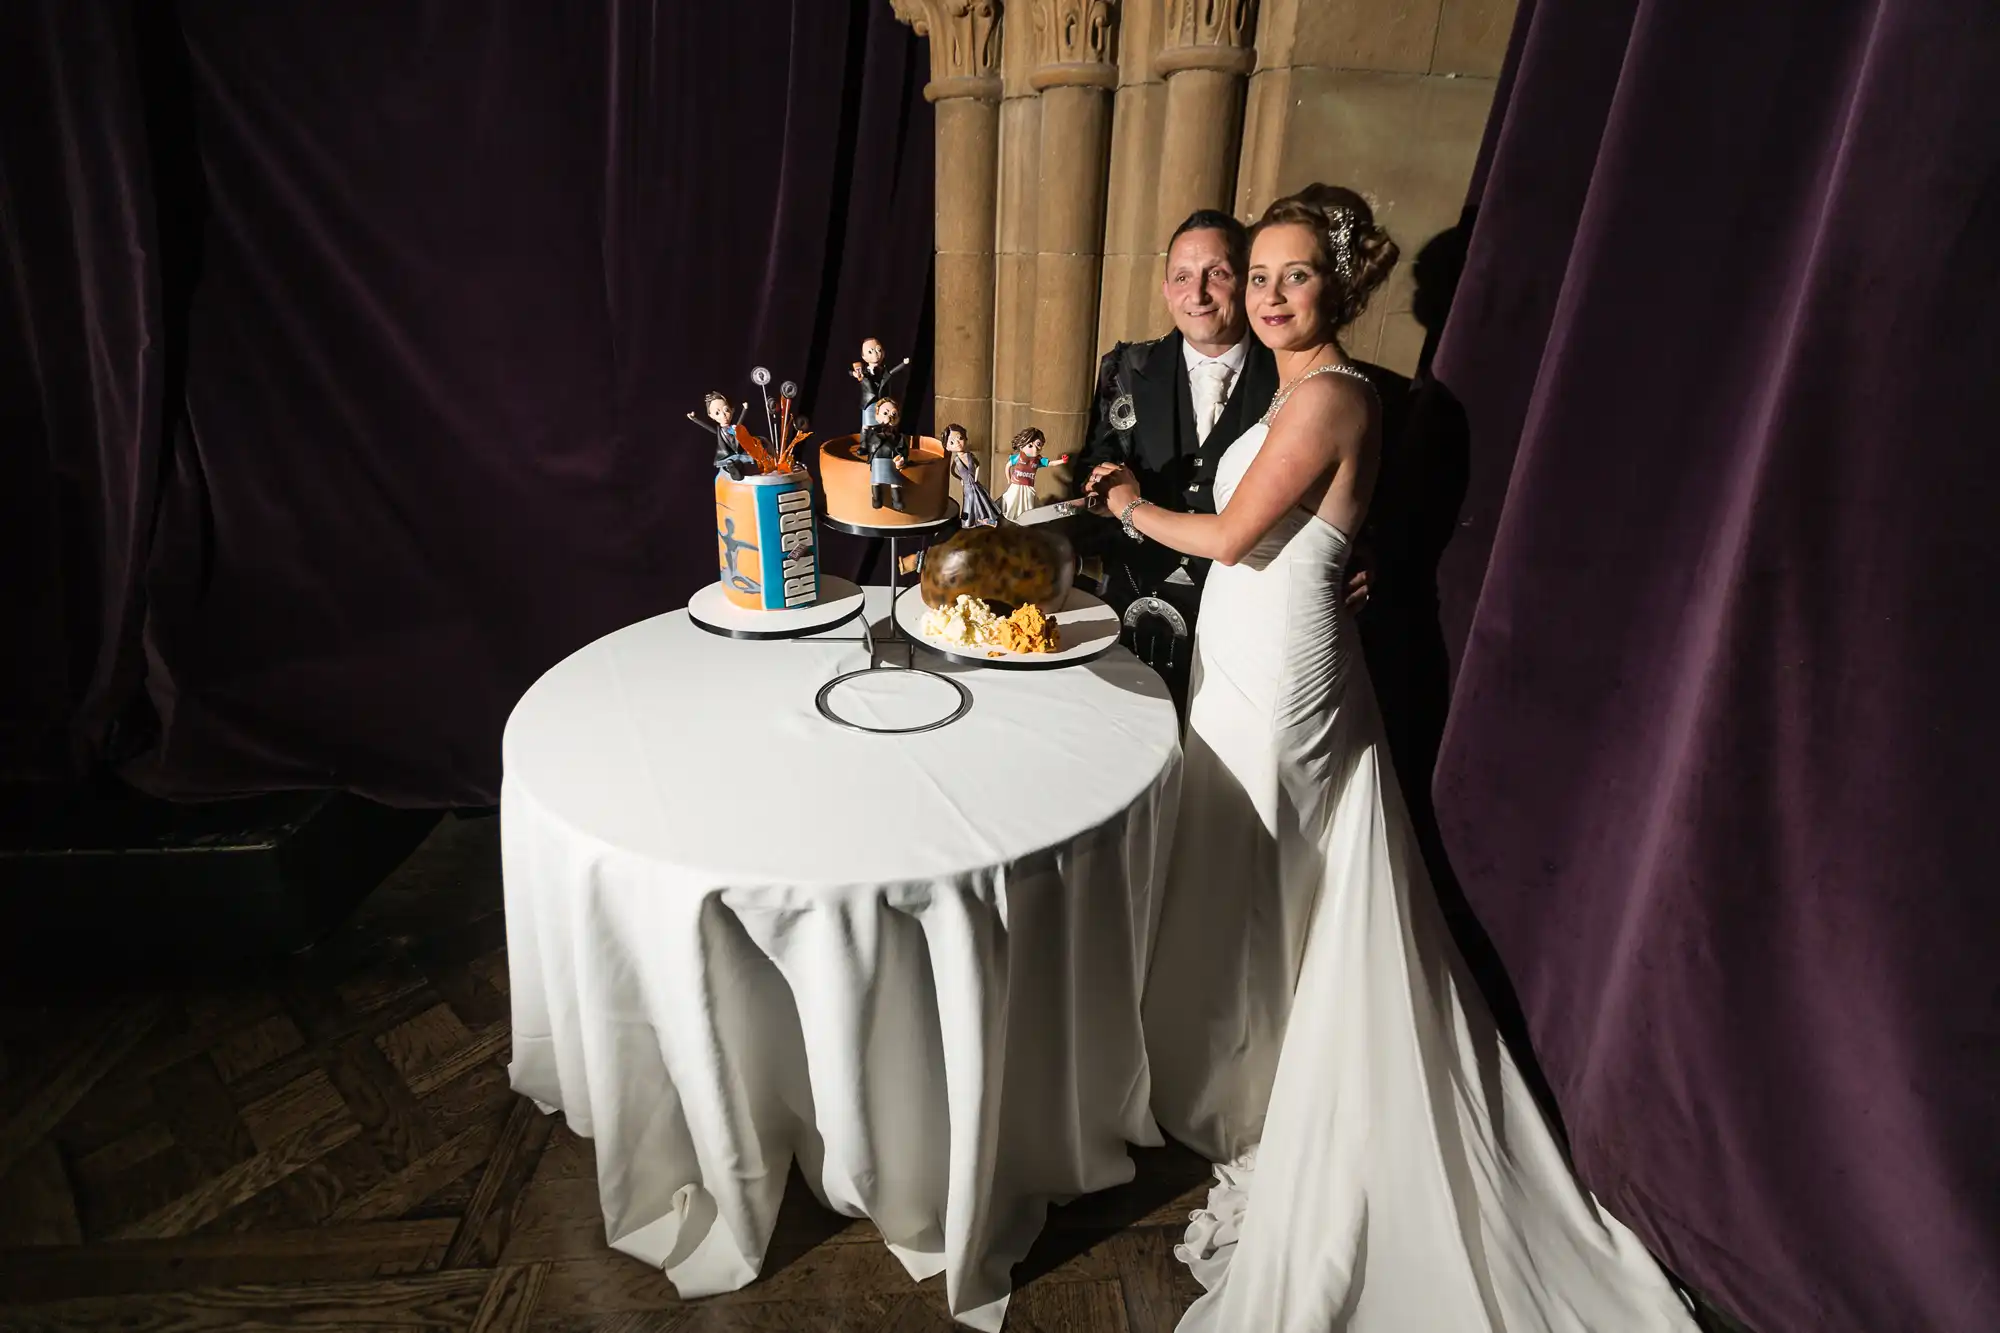 A bride and groom in formal attire cutting their wedding cake at a table, surrounded by curtains in a grand hall.